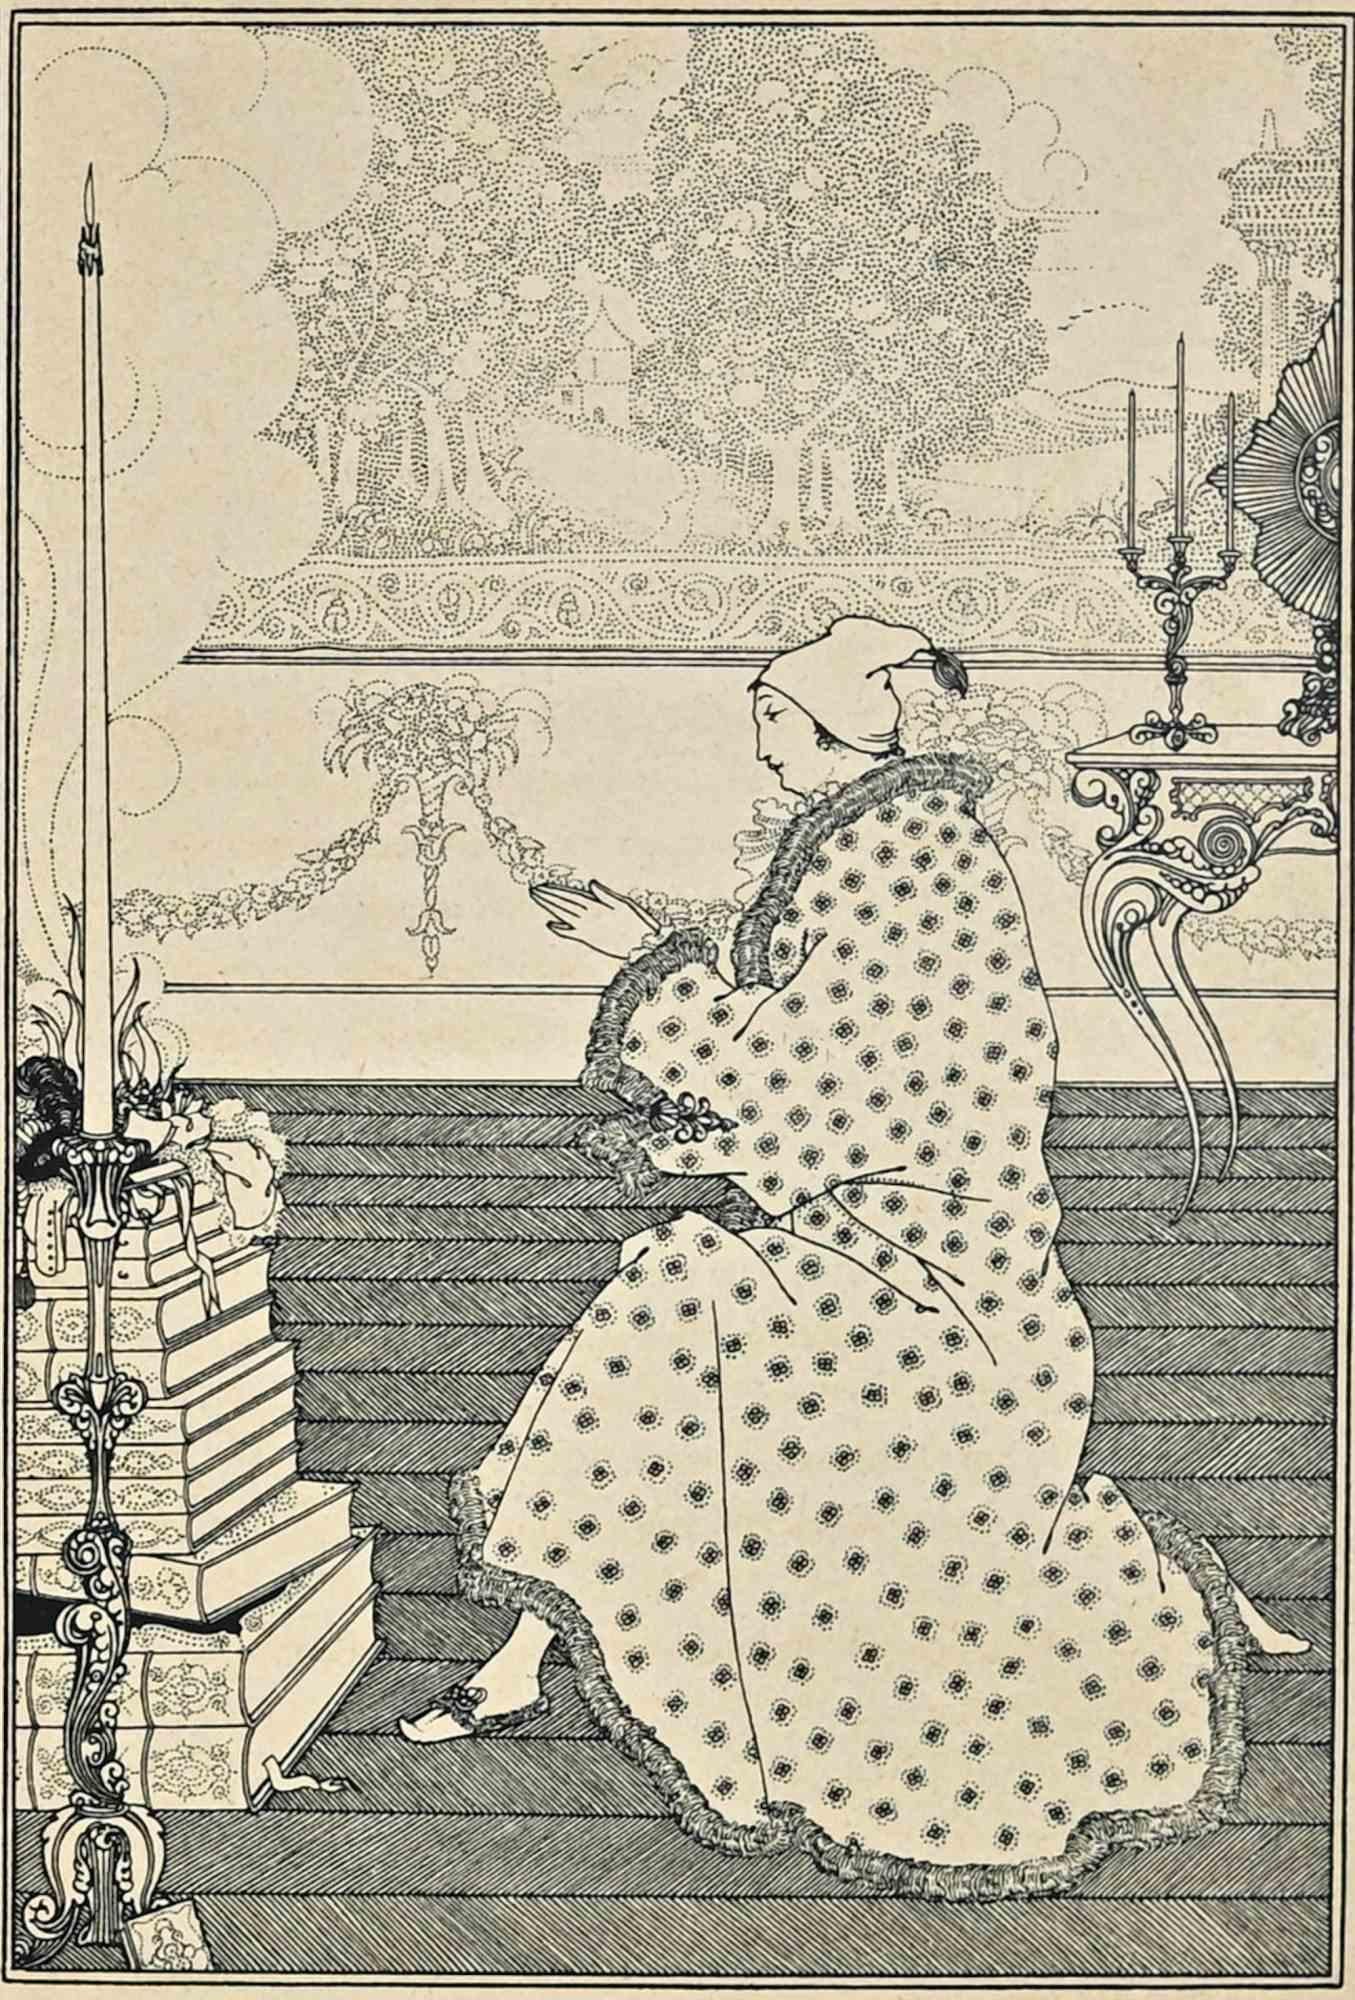 The Praying is an original lithograph realized by Aubrey Beardsley in 1896, as part of the Suite "The Rape of the Lock".

Good conditions.

Included a Passepartout: 40 x30 cm.

Aubrey Beardsley  (1872-1898) was an English illustrator, writer and